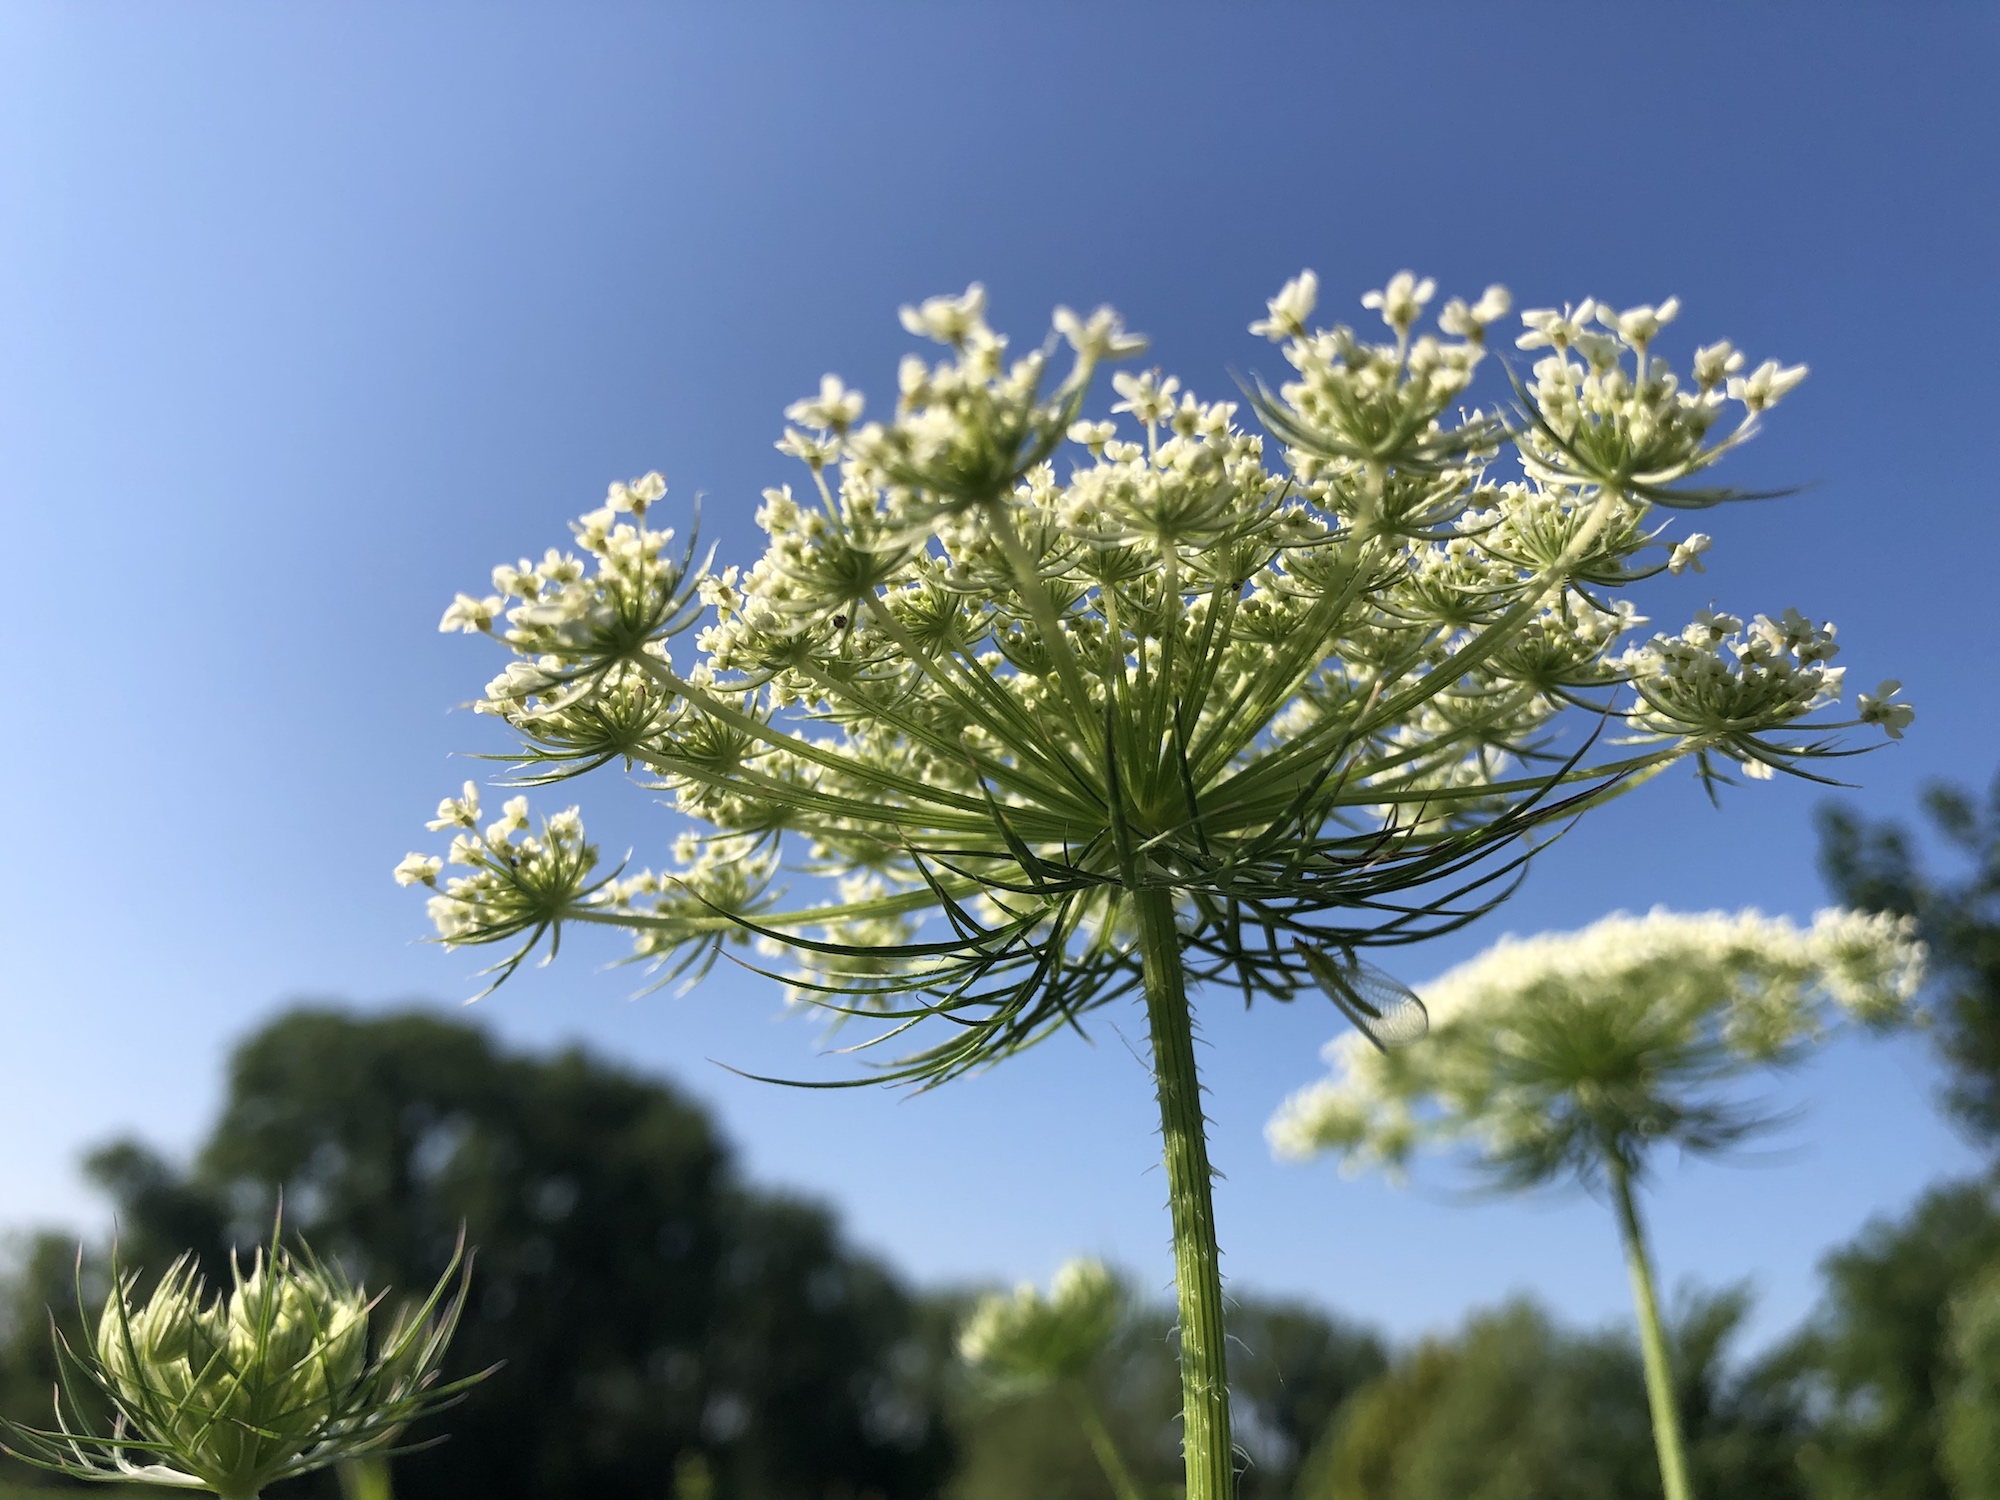 Queen Anne's Lace on bank of retaining pond on the corner of Nakoma Road and Manitou Way in Madison, WI on July 7, 2019.